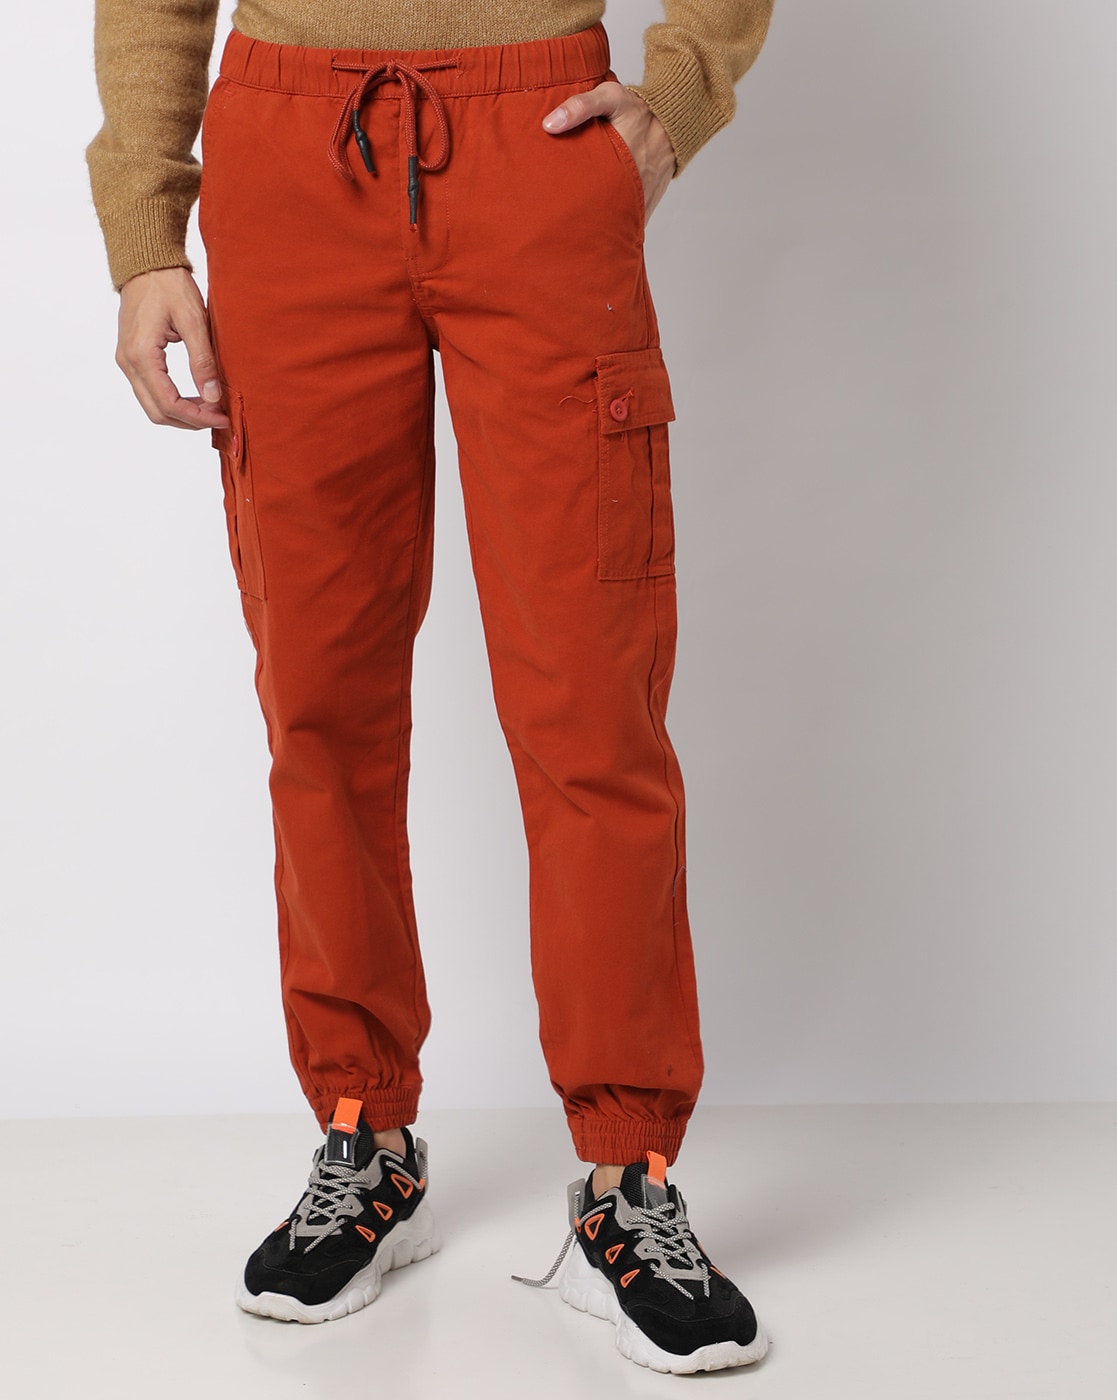 Missguided reflective cargo trousers in orange  ASOS